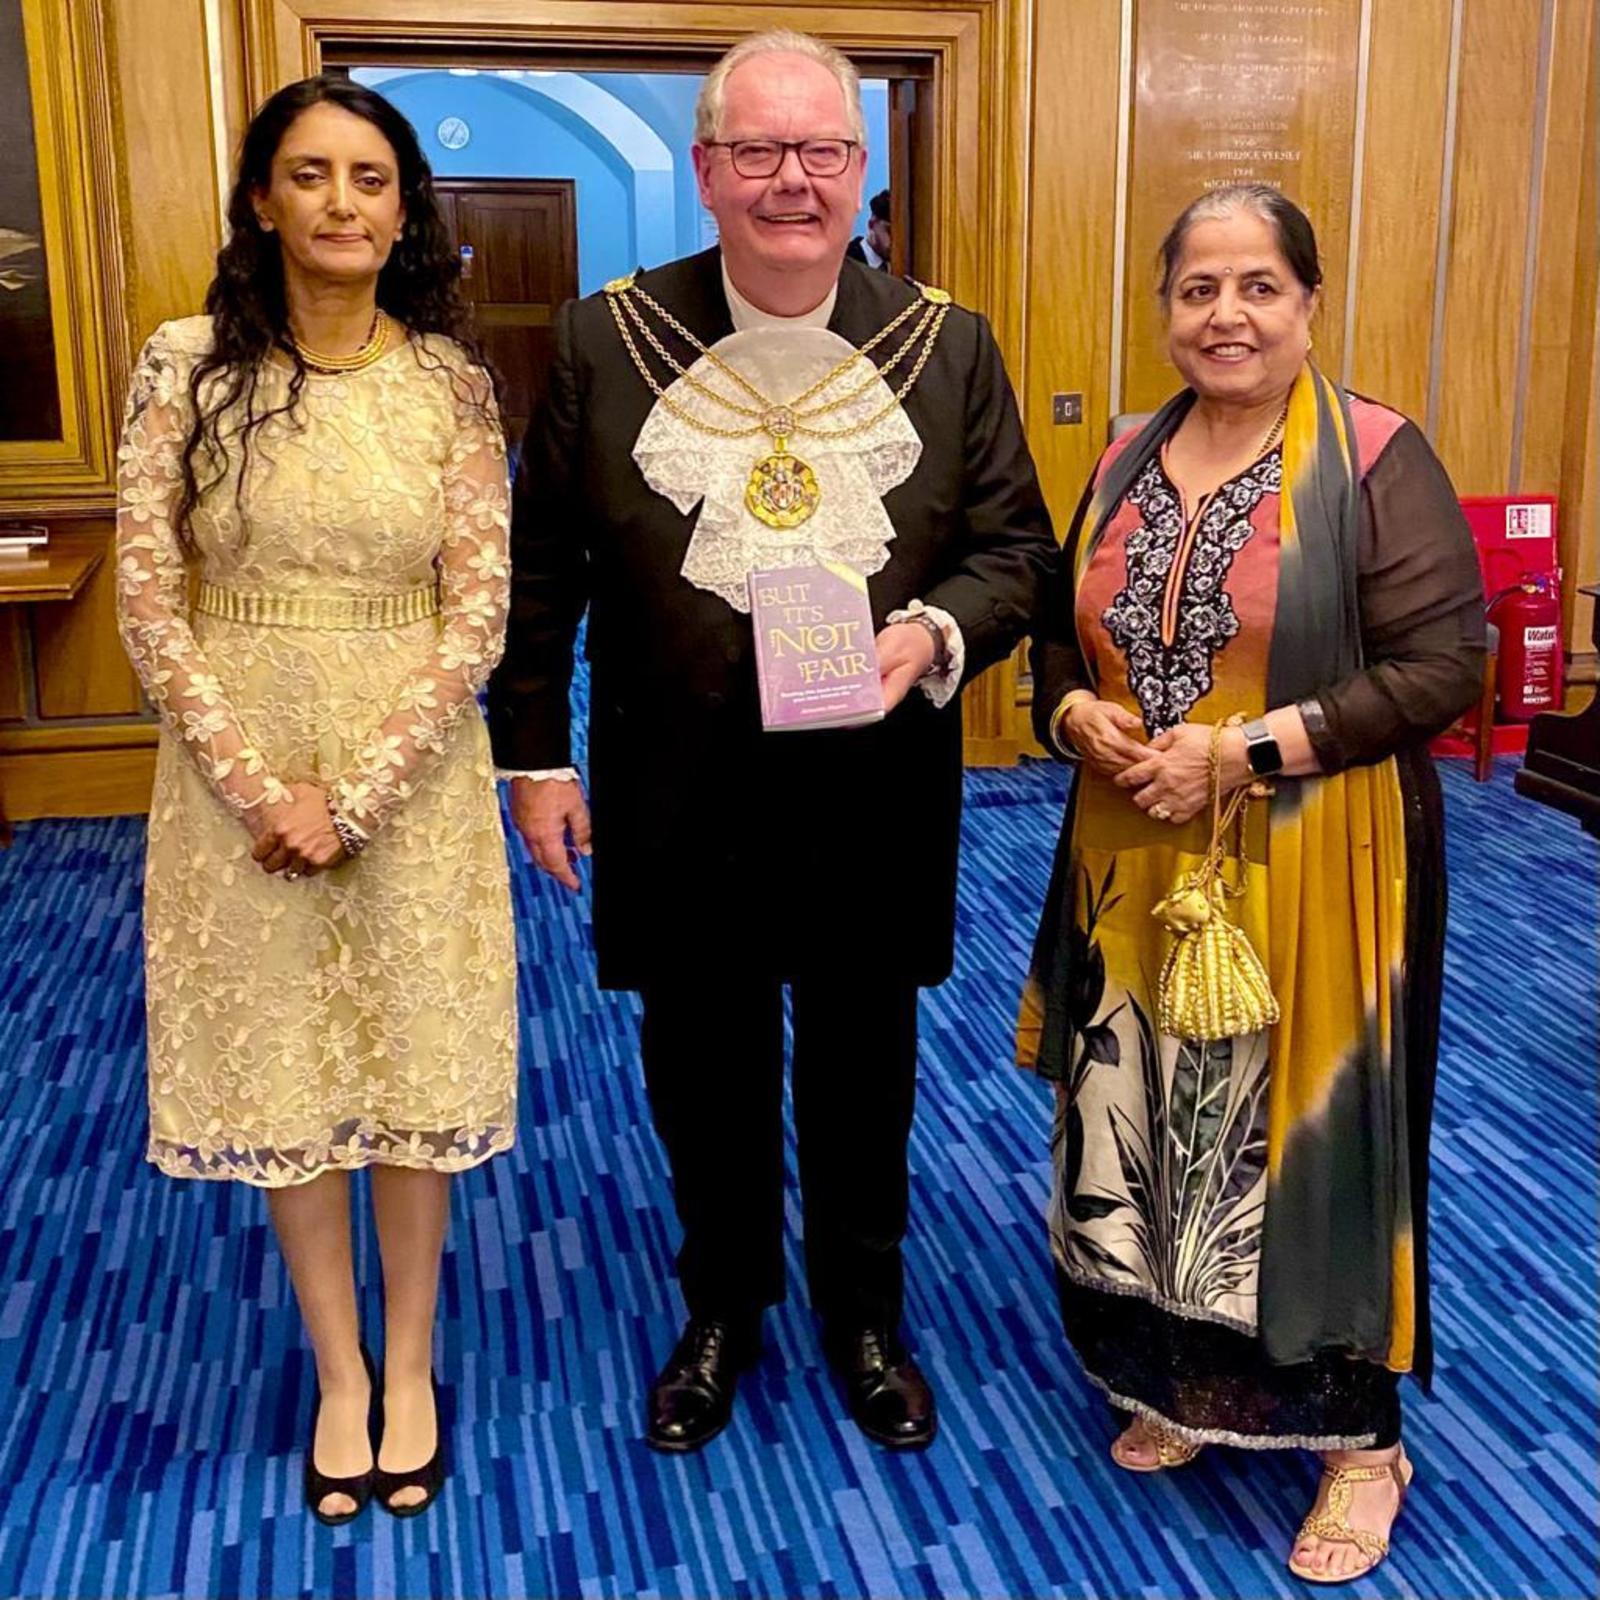 25 September 2023 - Delighted to host the launch of the new edition of ’it isn’t fair’ - the book about forced marriage- on behalf of Freedom, the charity trying to stop FGM, forced marriage and virginity testing abuse of young girls and women.